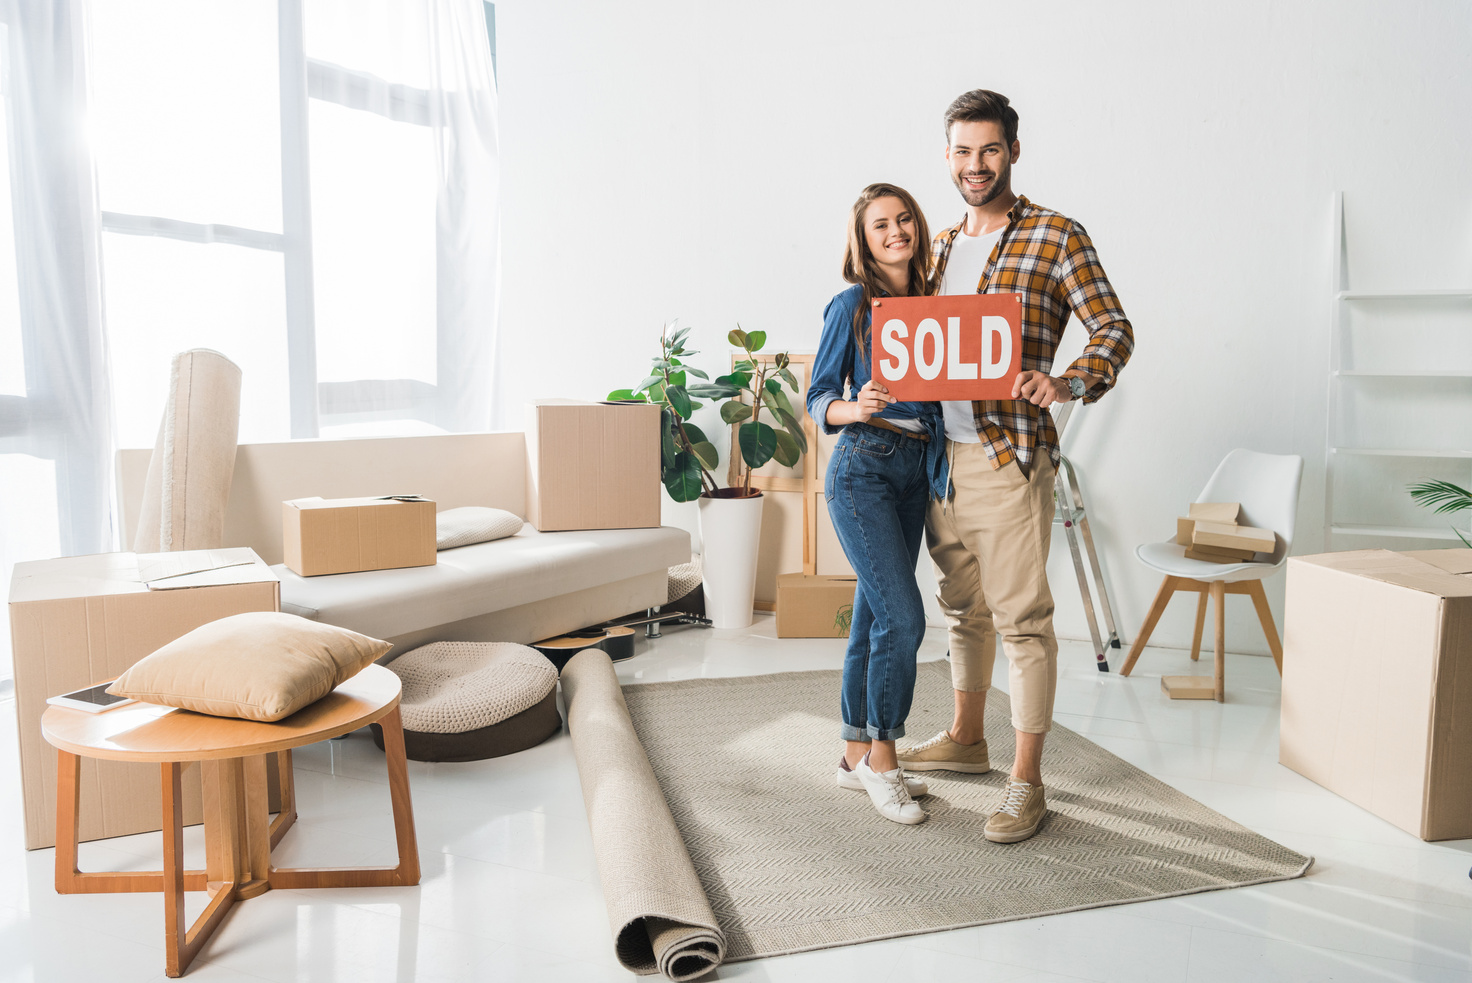 smiling couple holding sold red card at home with cardboard boxes